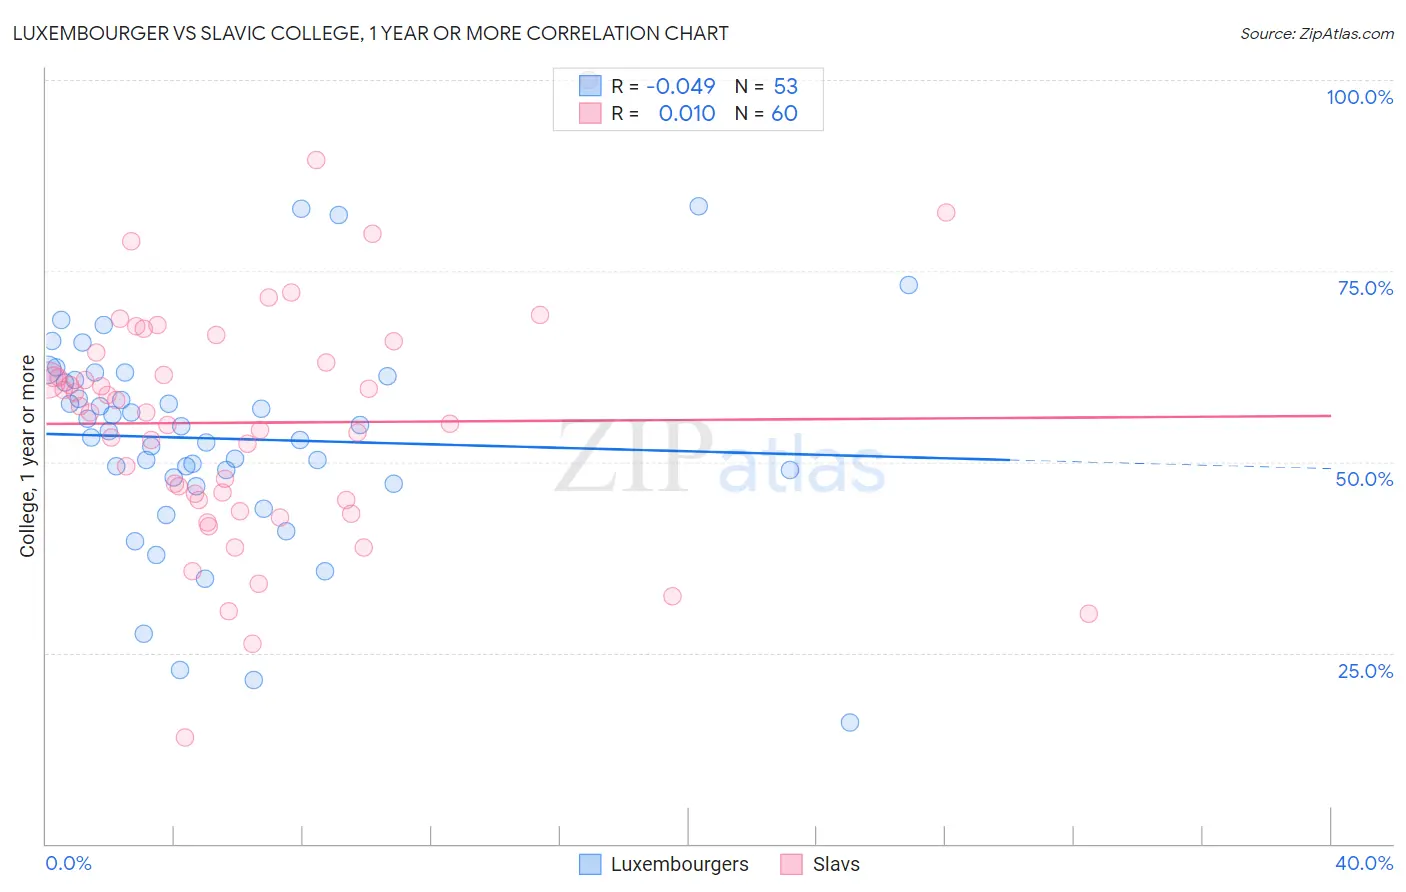 Luxembourger vs Slavic College, 1 year or more